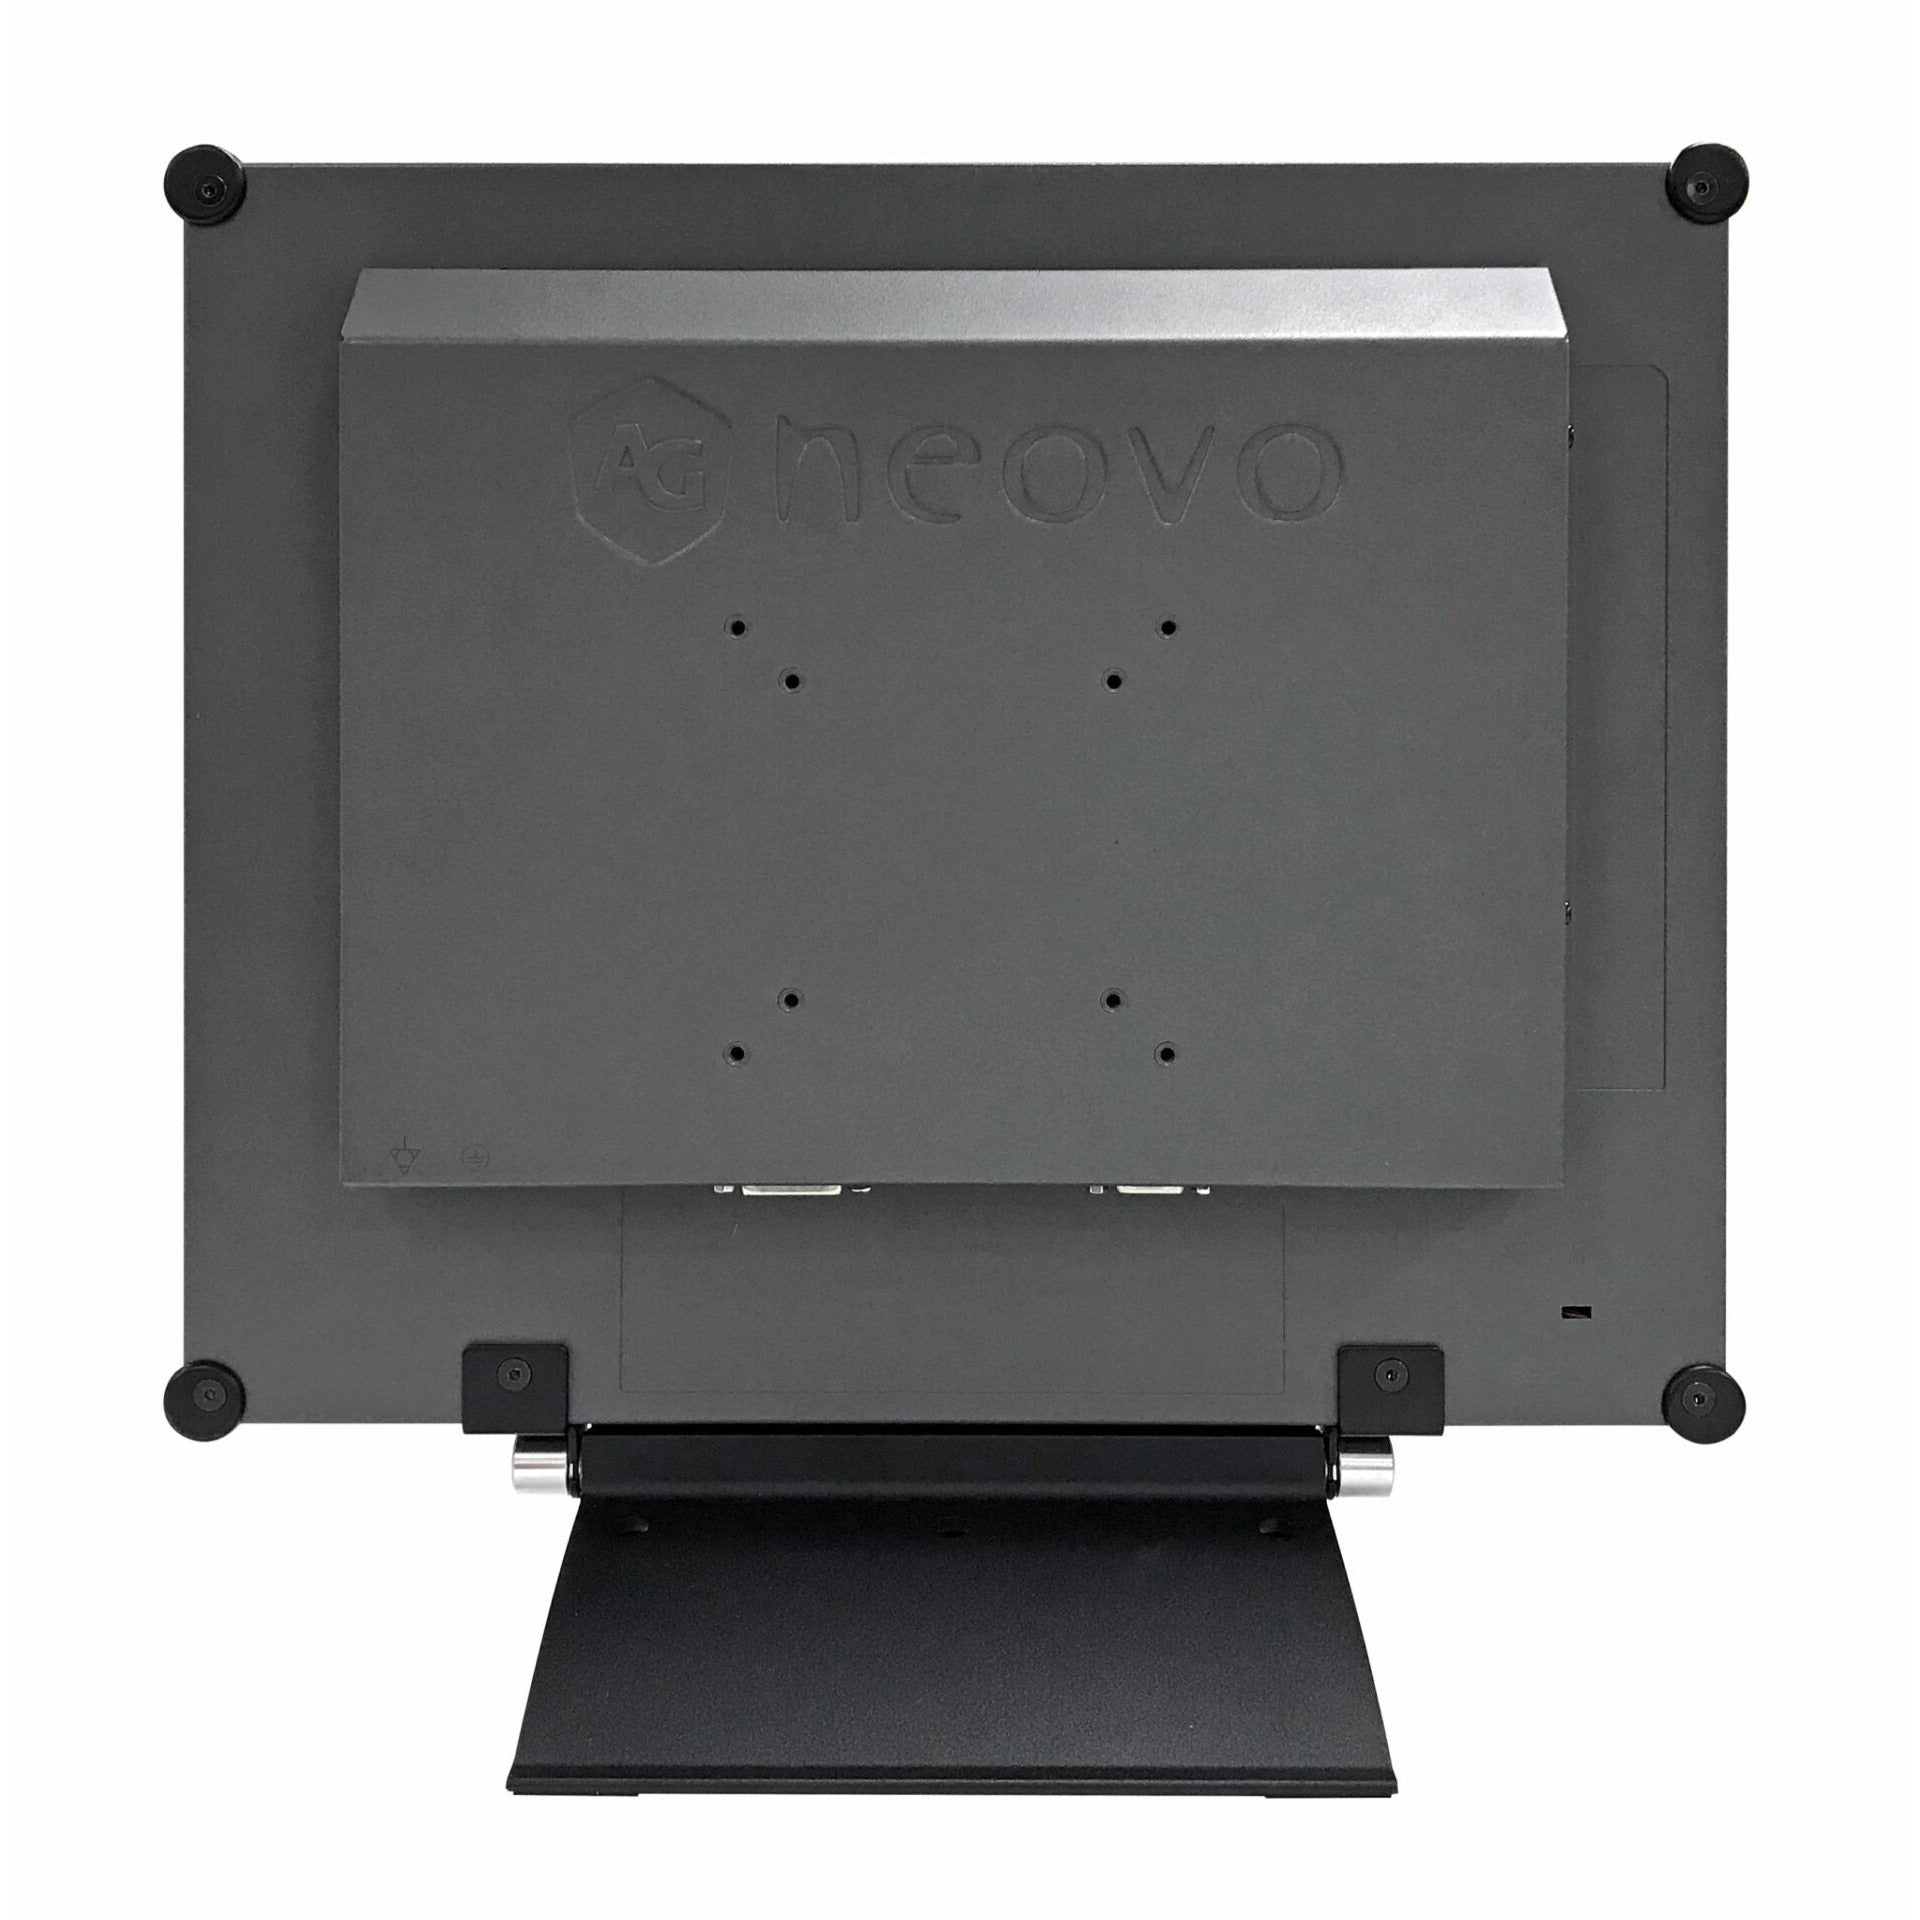 AG Neovo X-15E 15-Inch 4:3 Semi-Industrial Monitor With Metal Casing